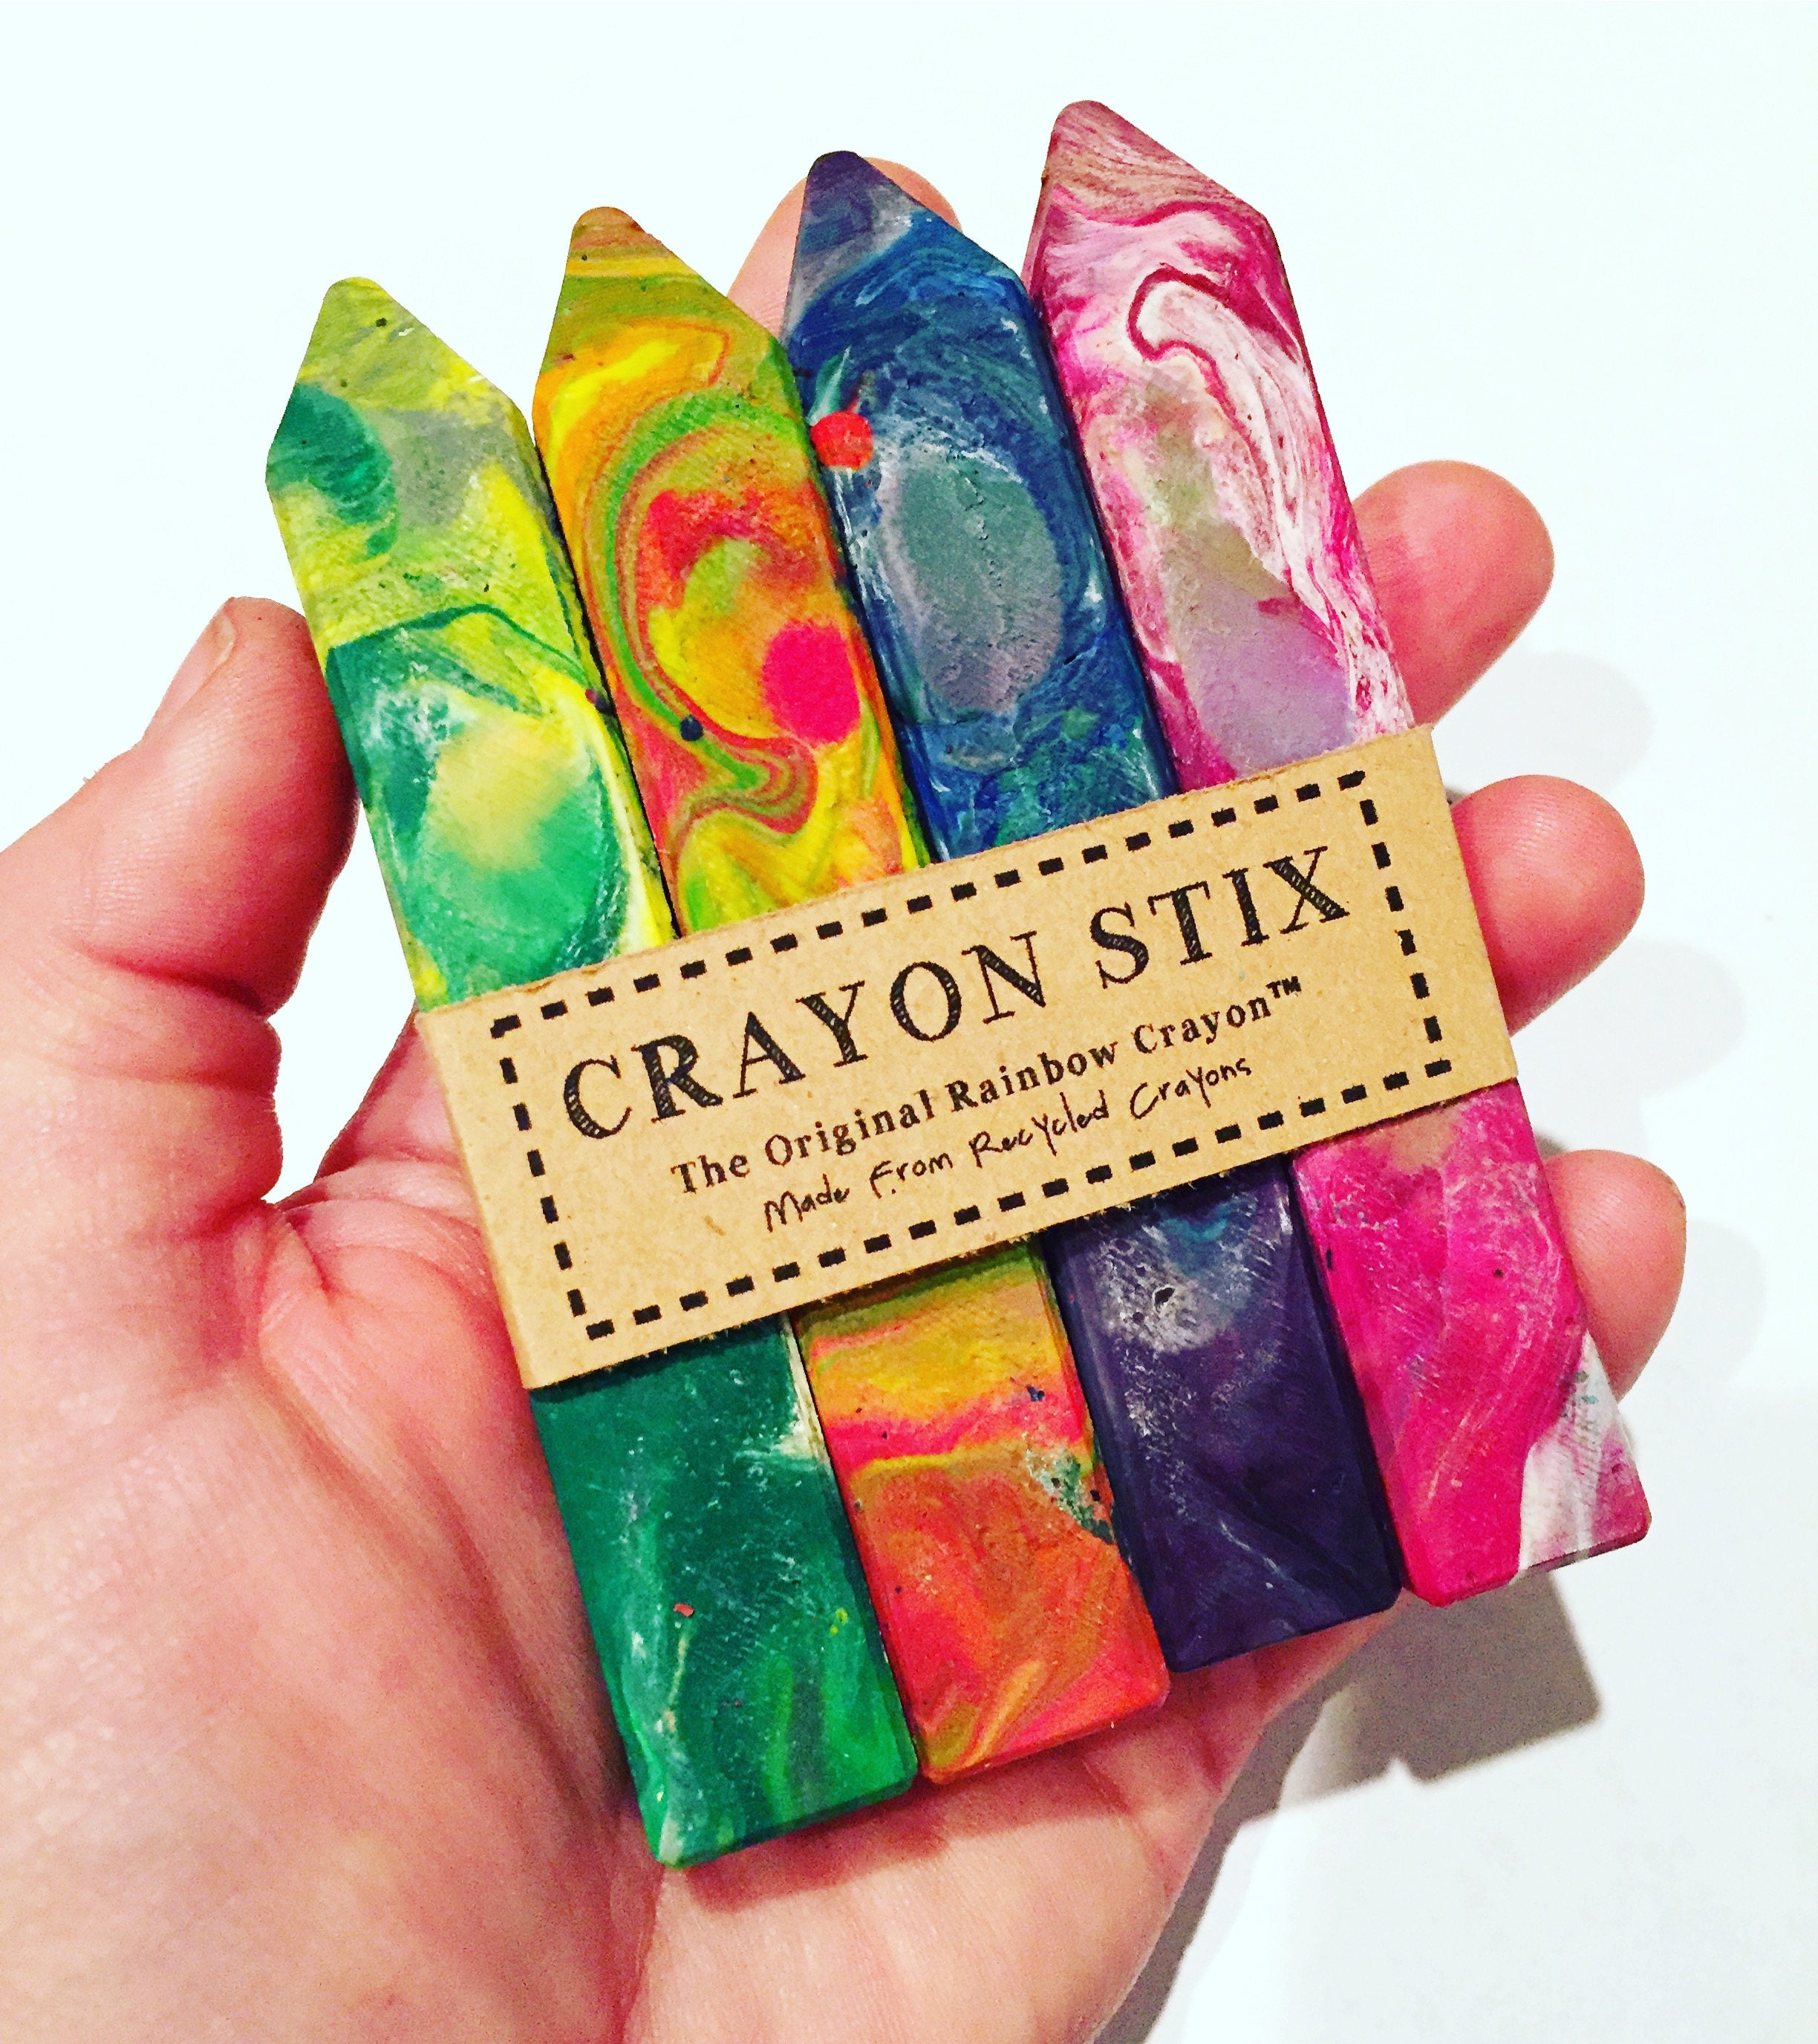 Rock Crayon Collection Gem Crayons Kids. Party Favors Kids Gifts Stocking  Stuffers Kids Birthday Gifts Easter Basket Stuffers 